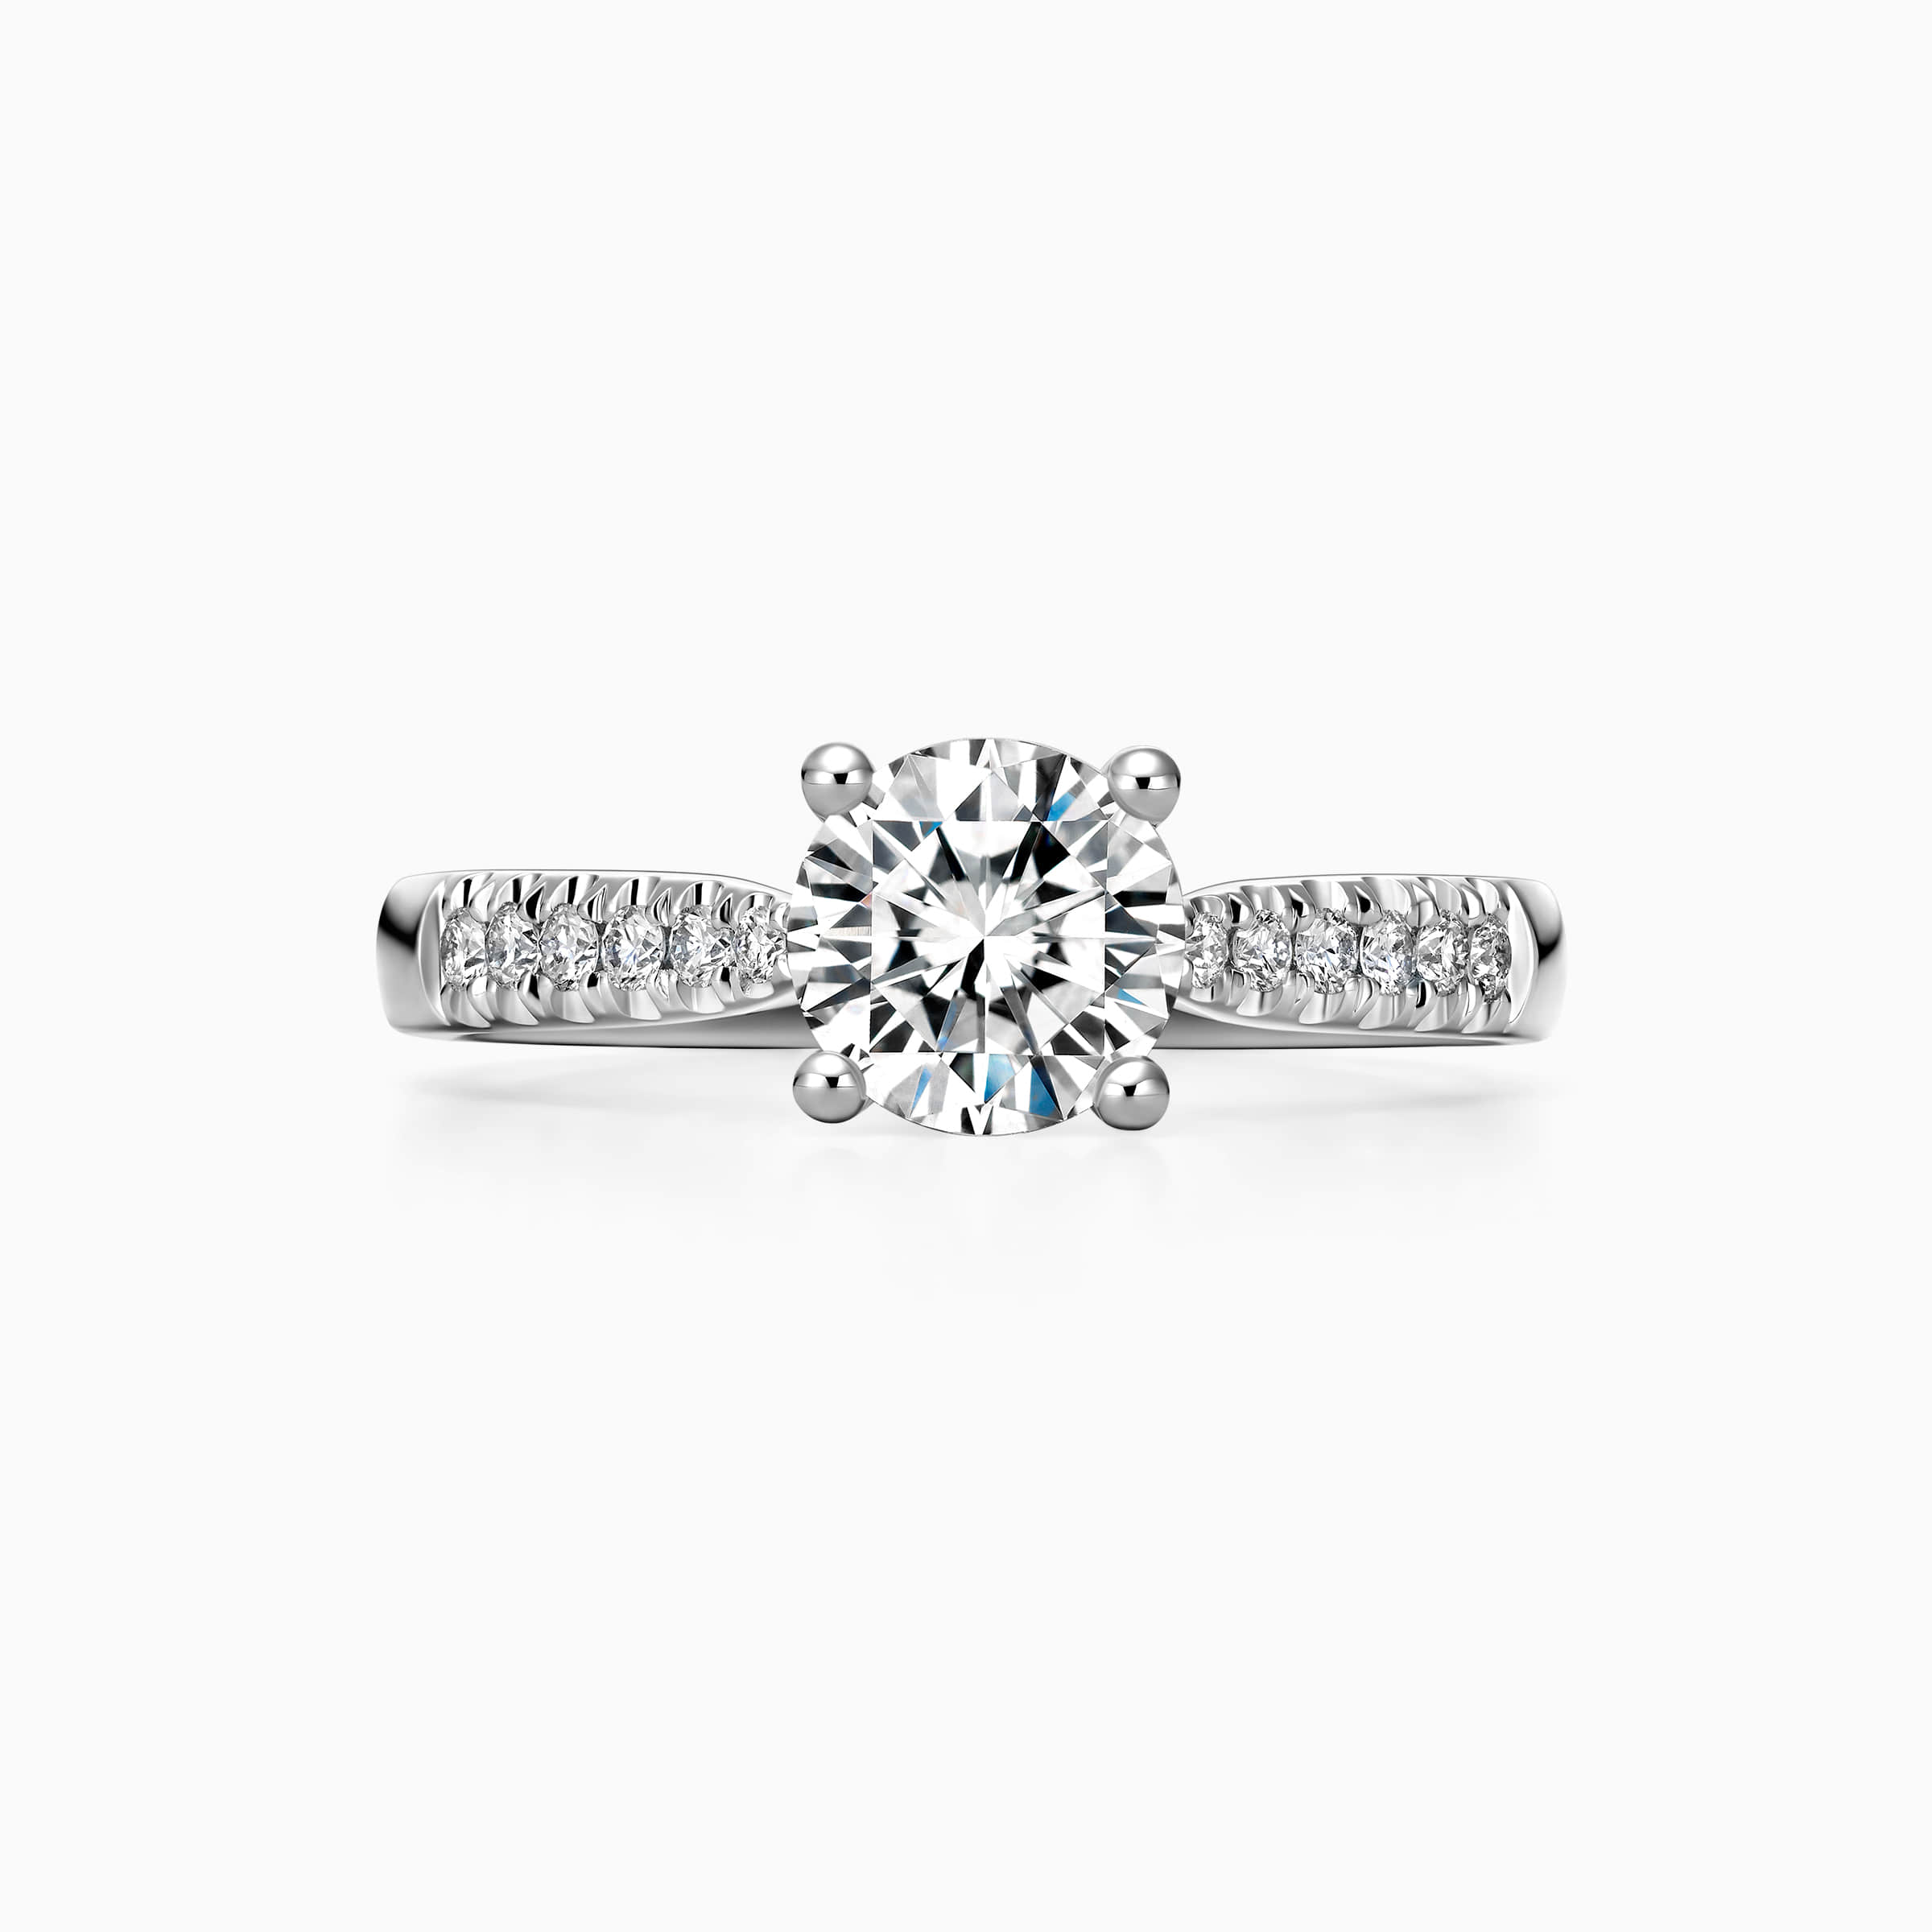 darry ring 4 prong engagement ring front view